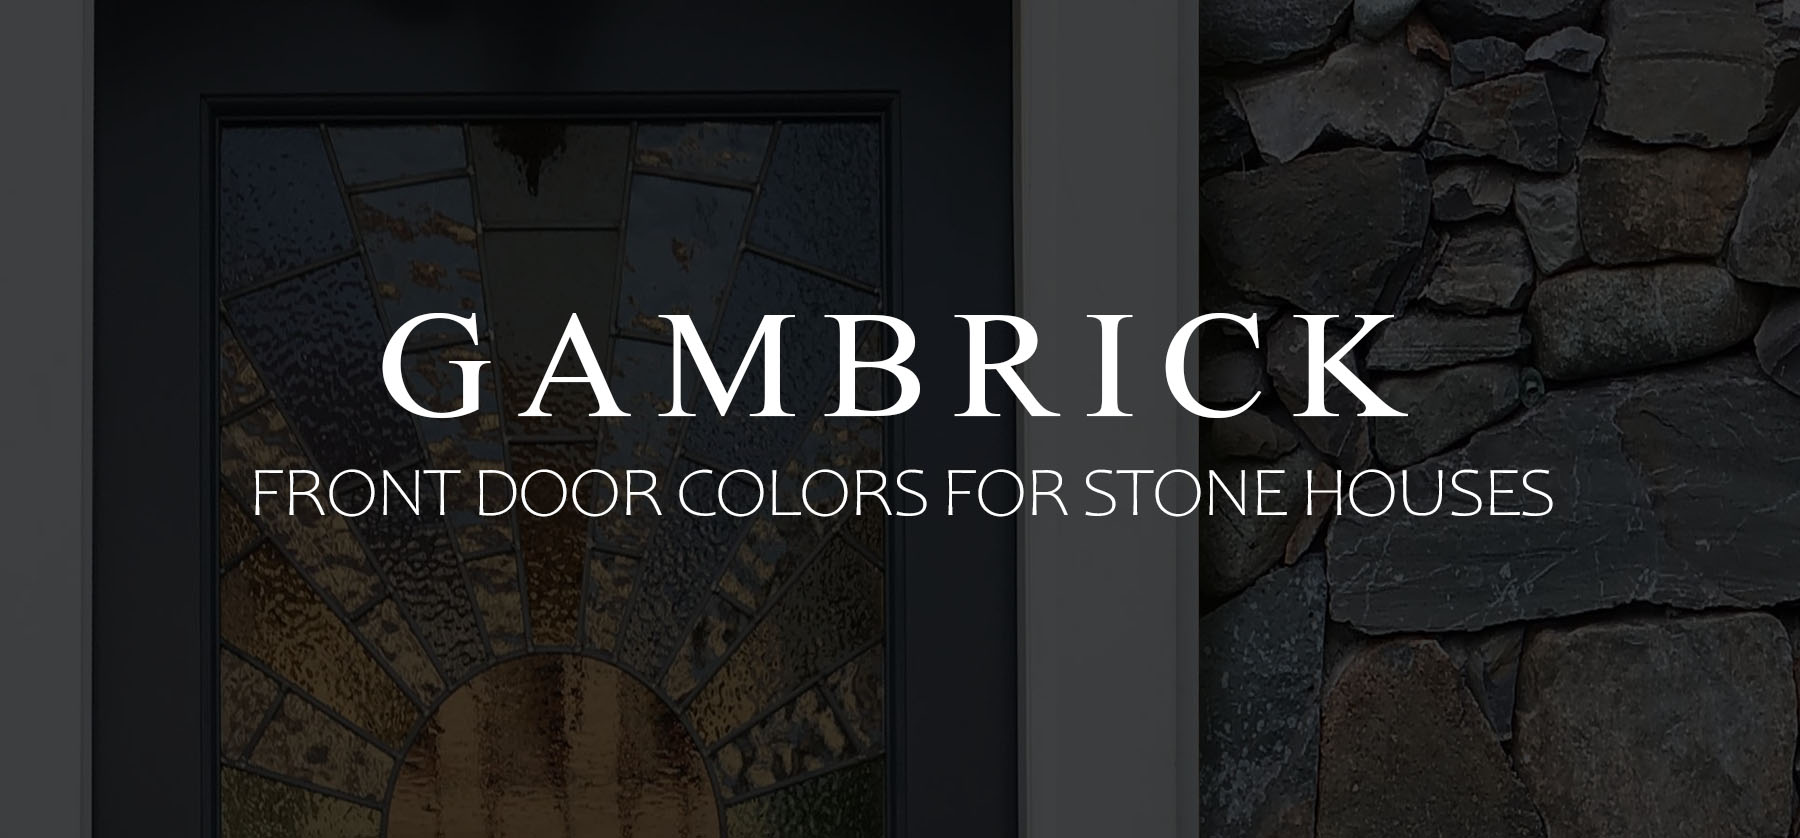 Front door colors for stone houses banner picture